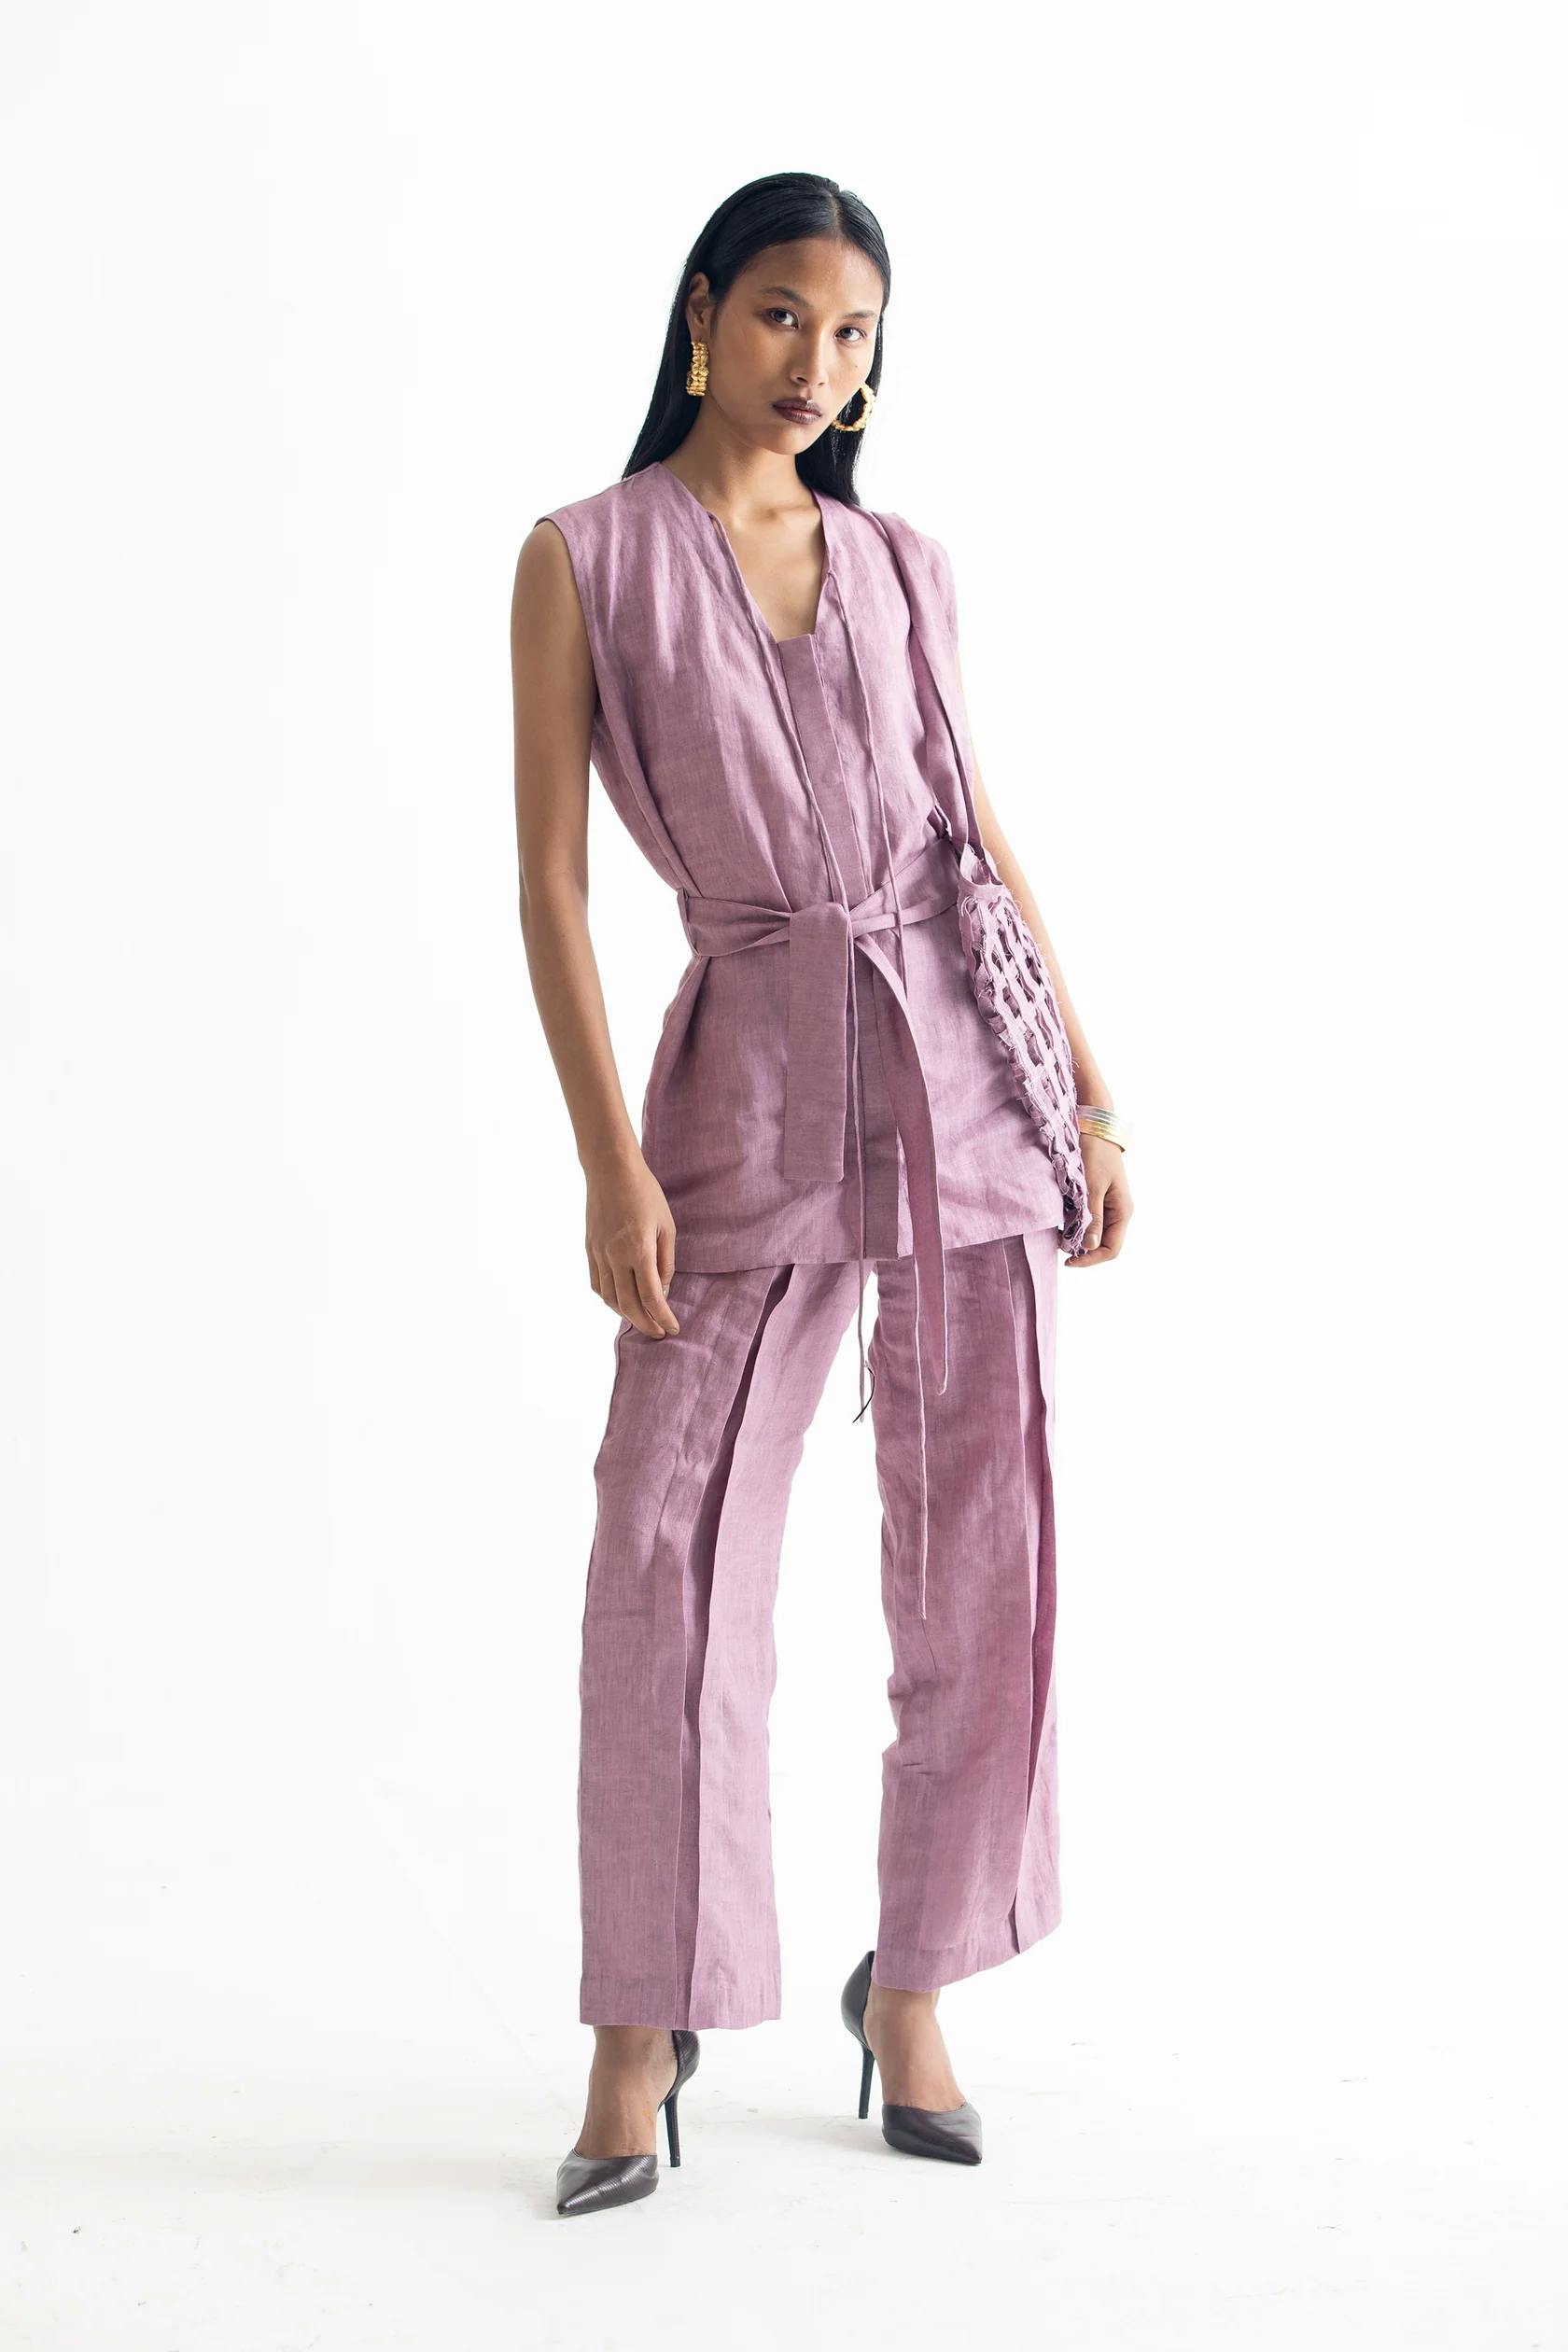 Lilac linen co-ord set, a product by Corpora Studio